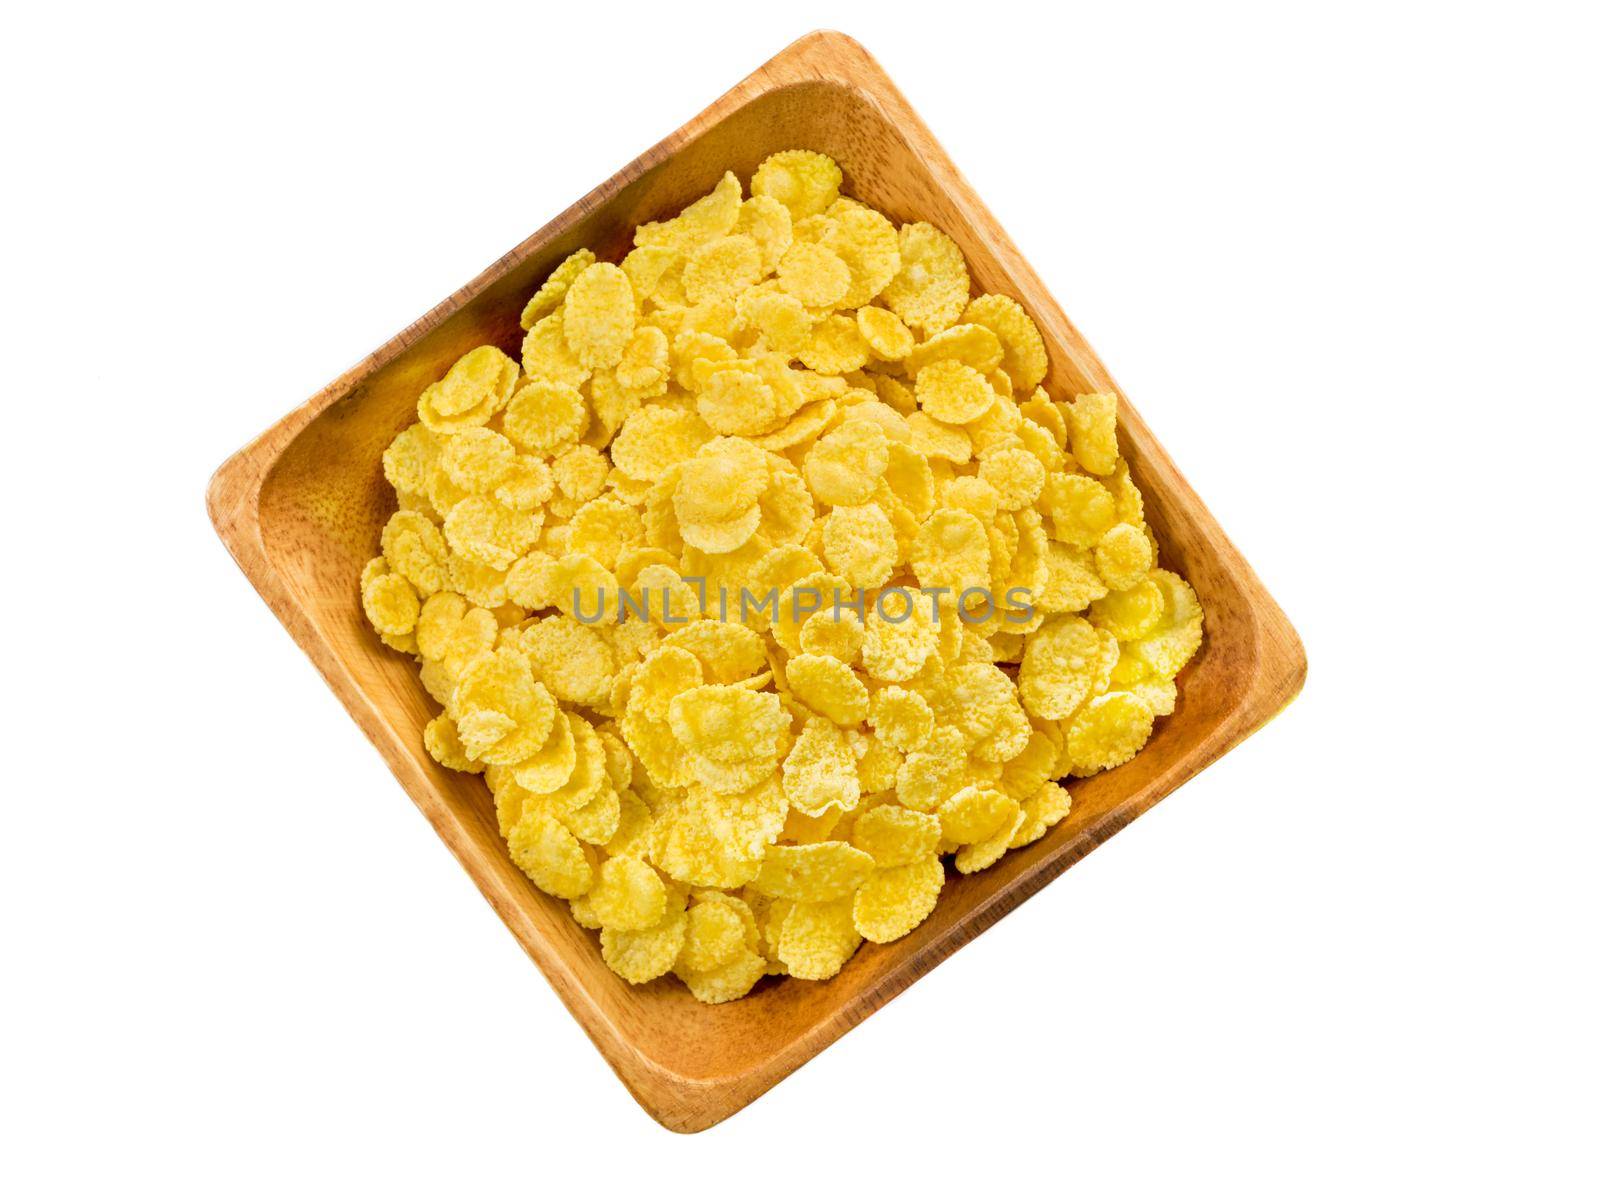 wooden bowl with dry cereal for breakfast, top view, white background